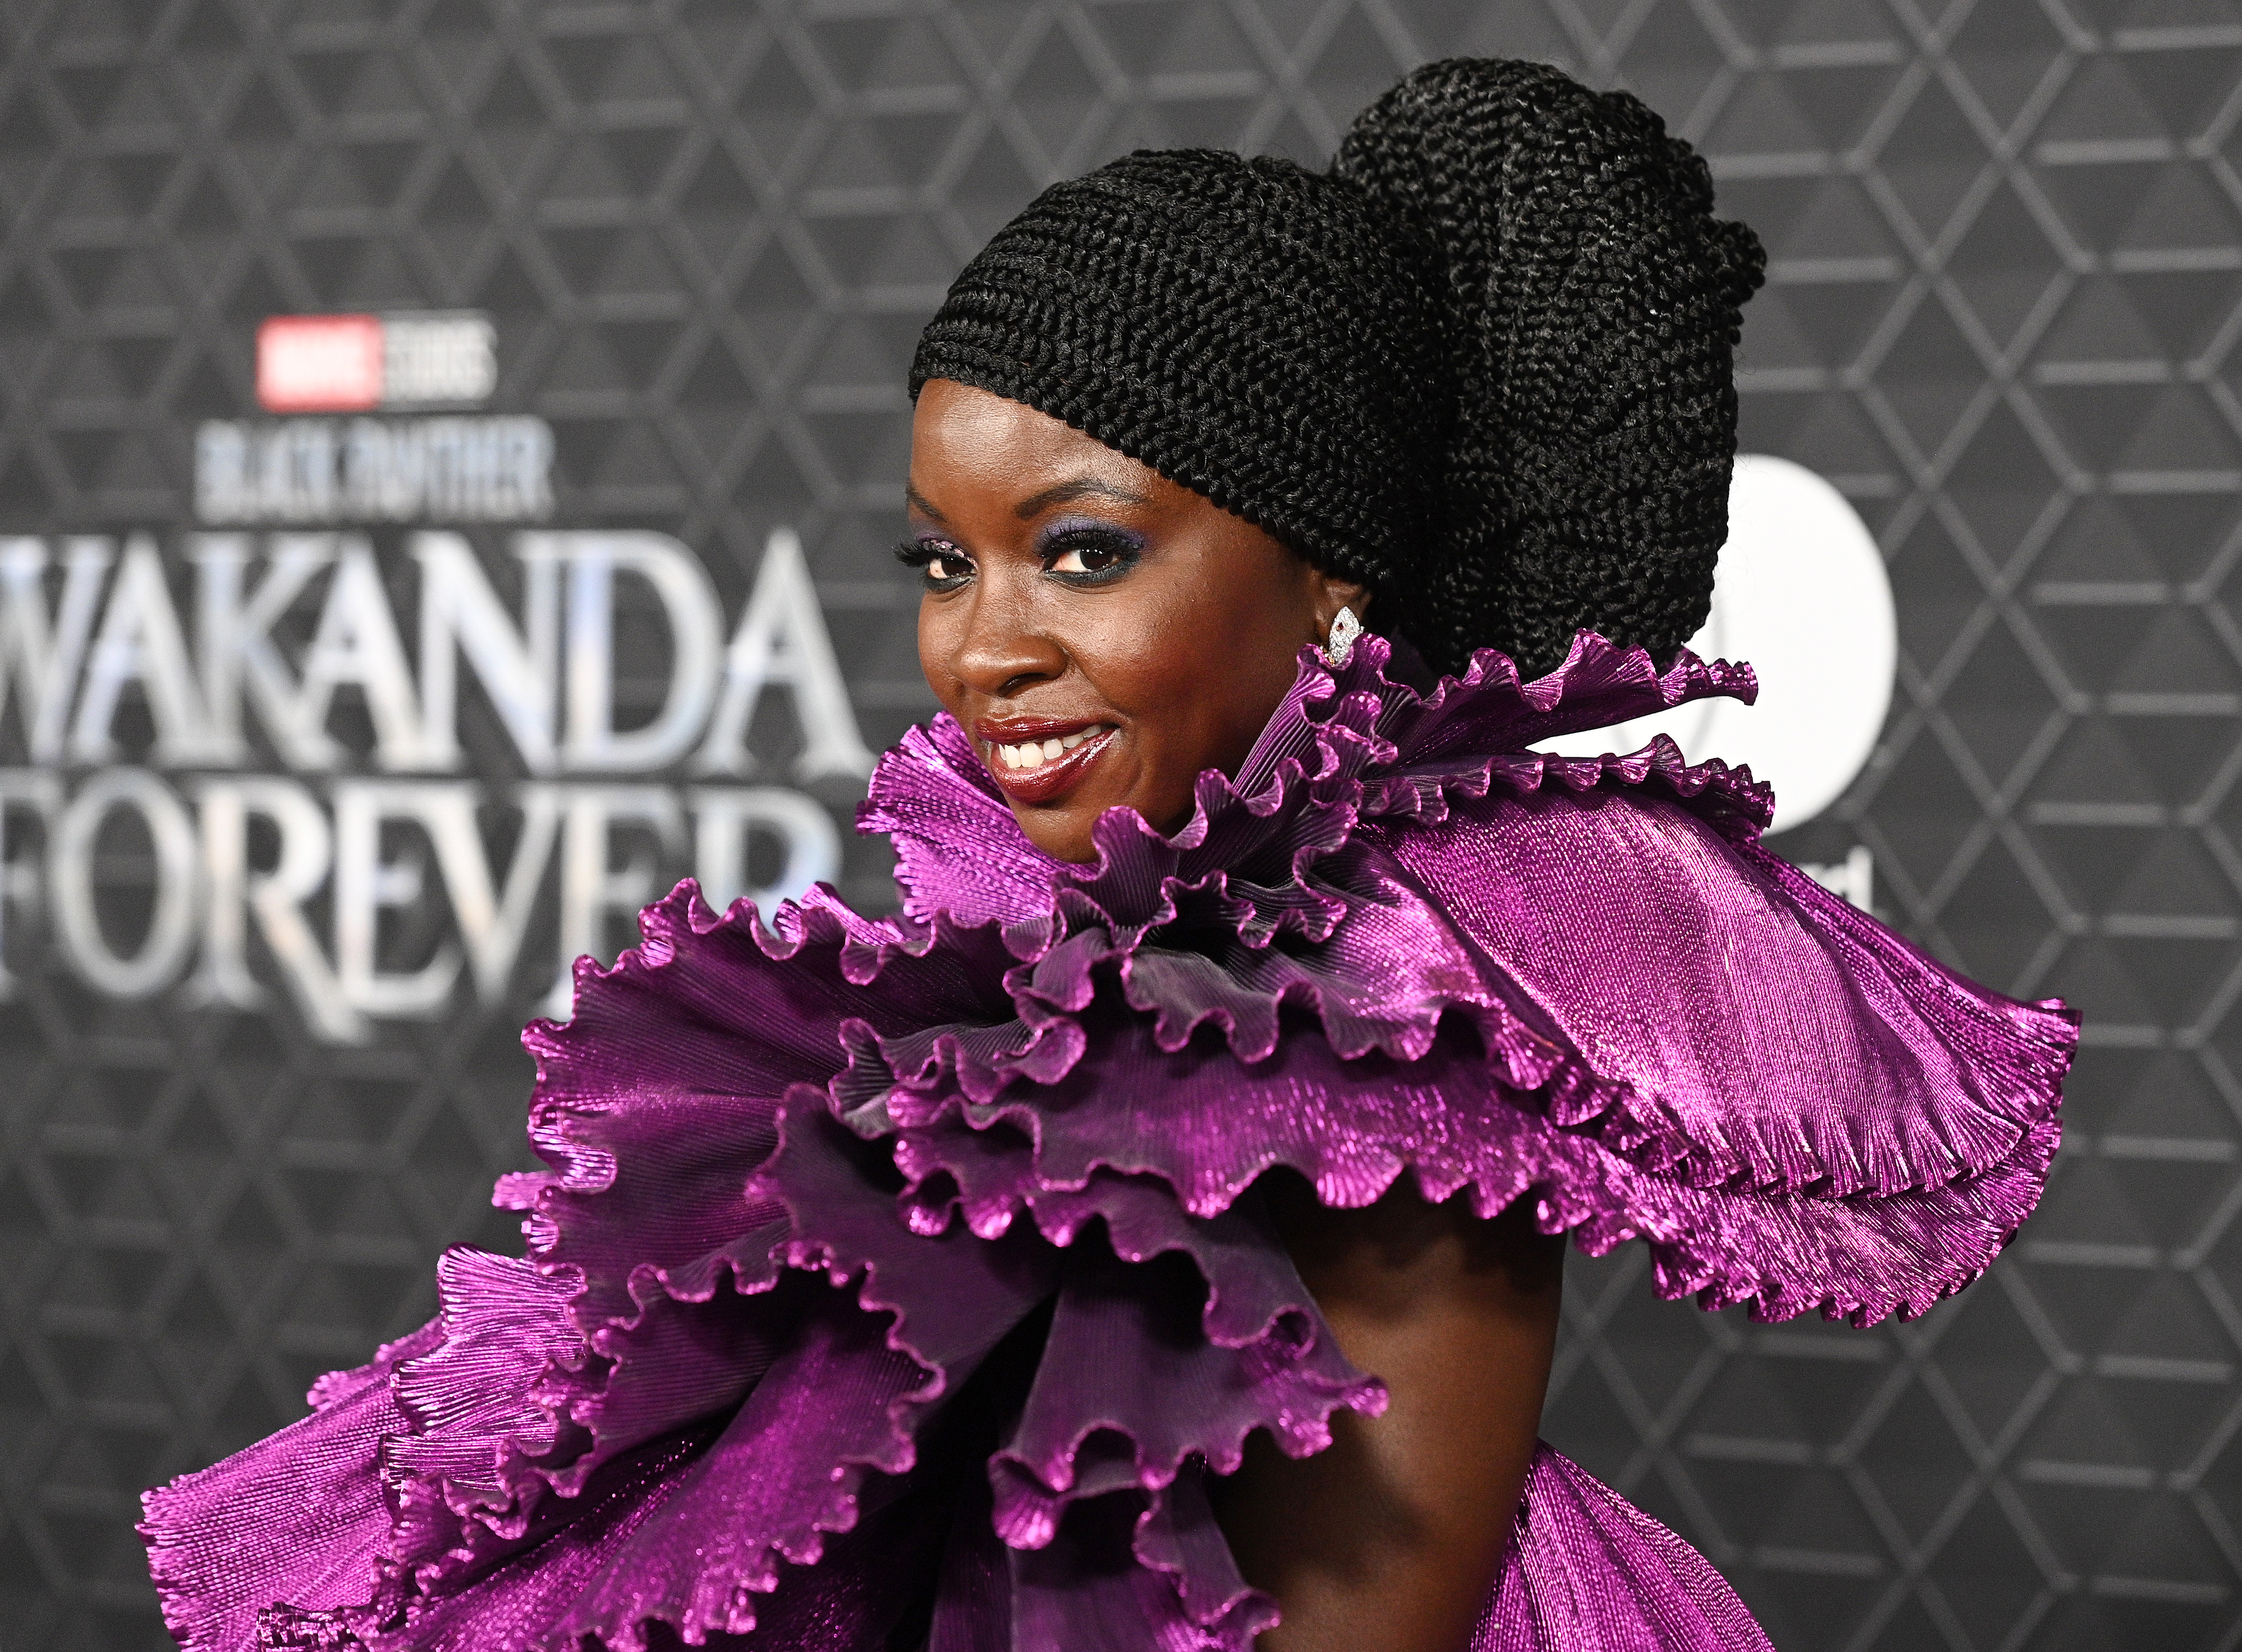 Danai Gurira attend the world premiere of Marvel Studios "Black Panther: Wakanda Forever" at the Dolby Theatre on October 26, 2022, in Los Angeles, California. | Source: Getty Images